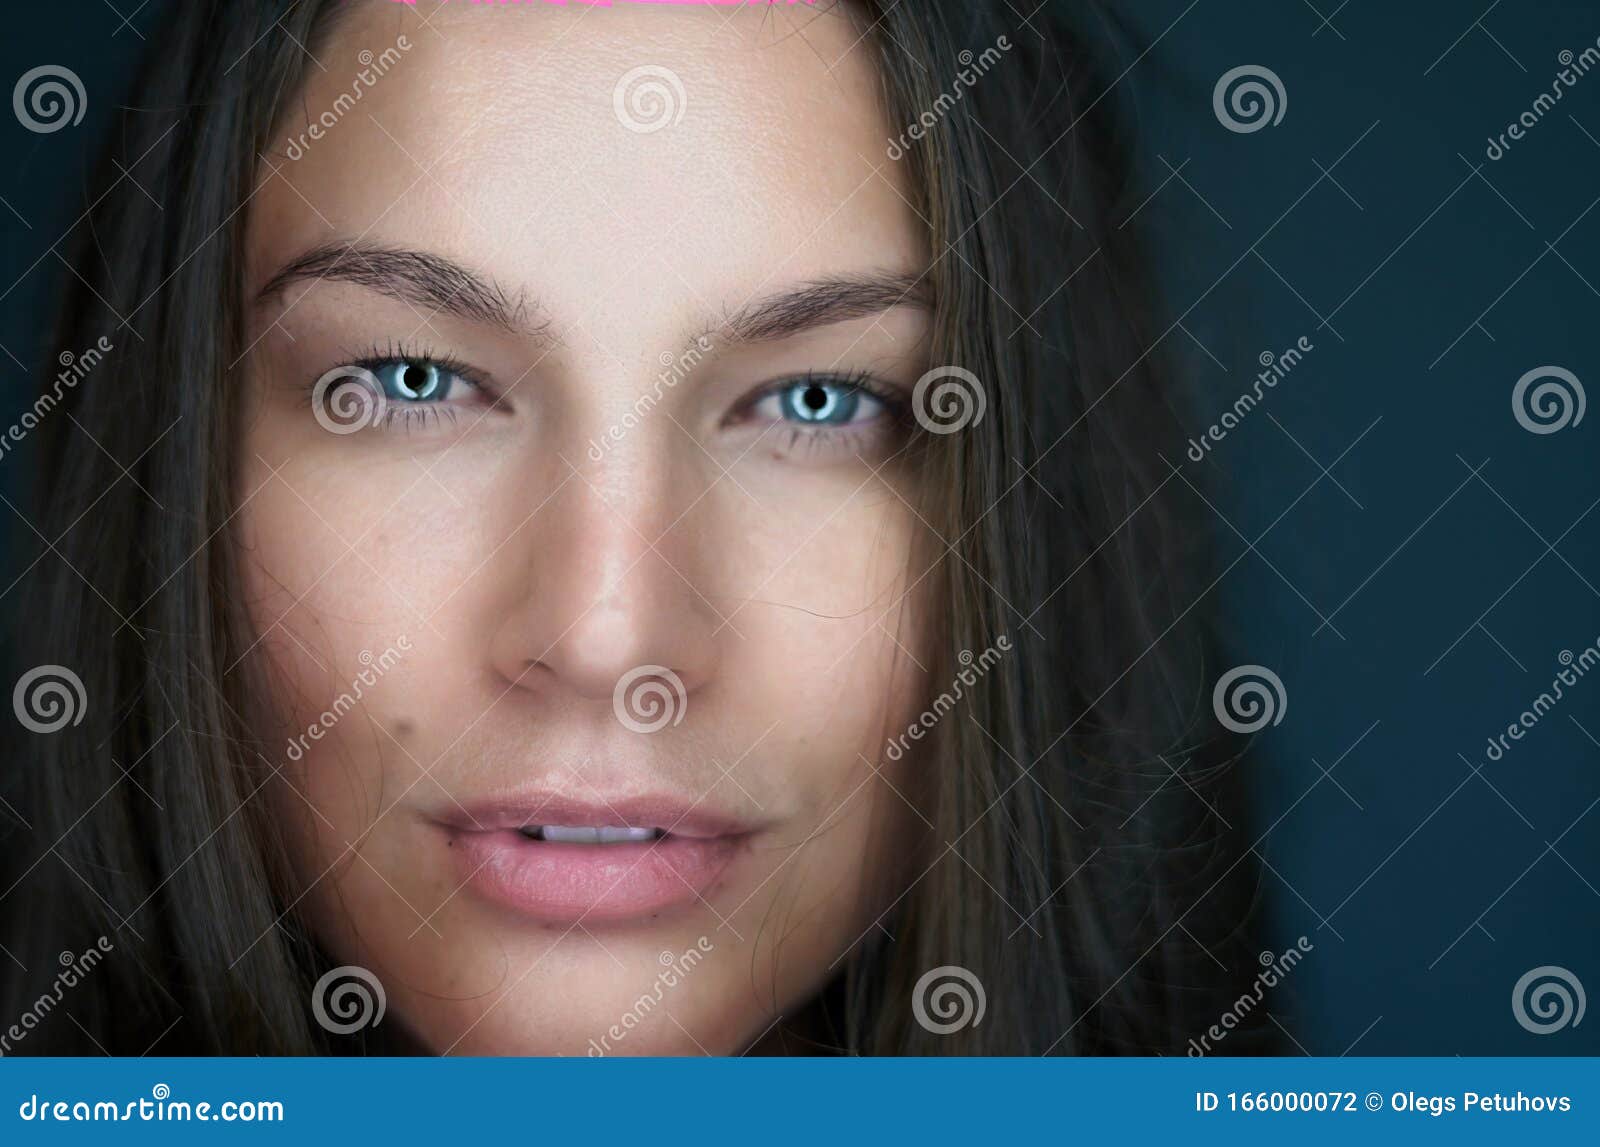 6. "Gorgeous blue-eyed woman with dark hair" - wide 1